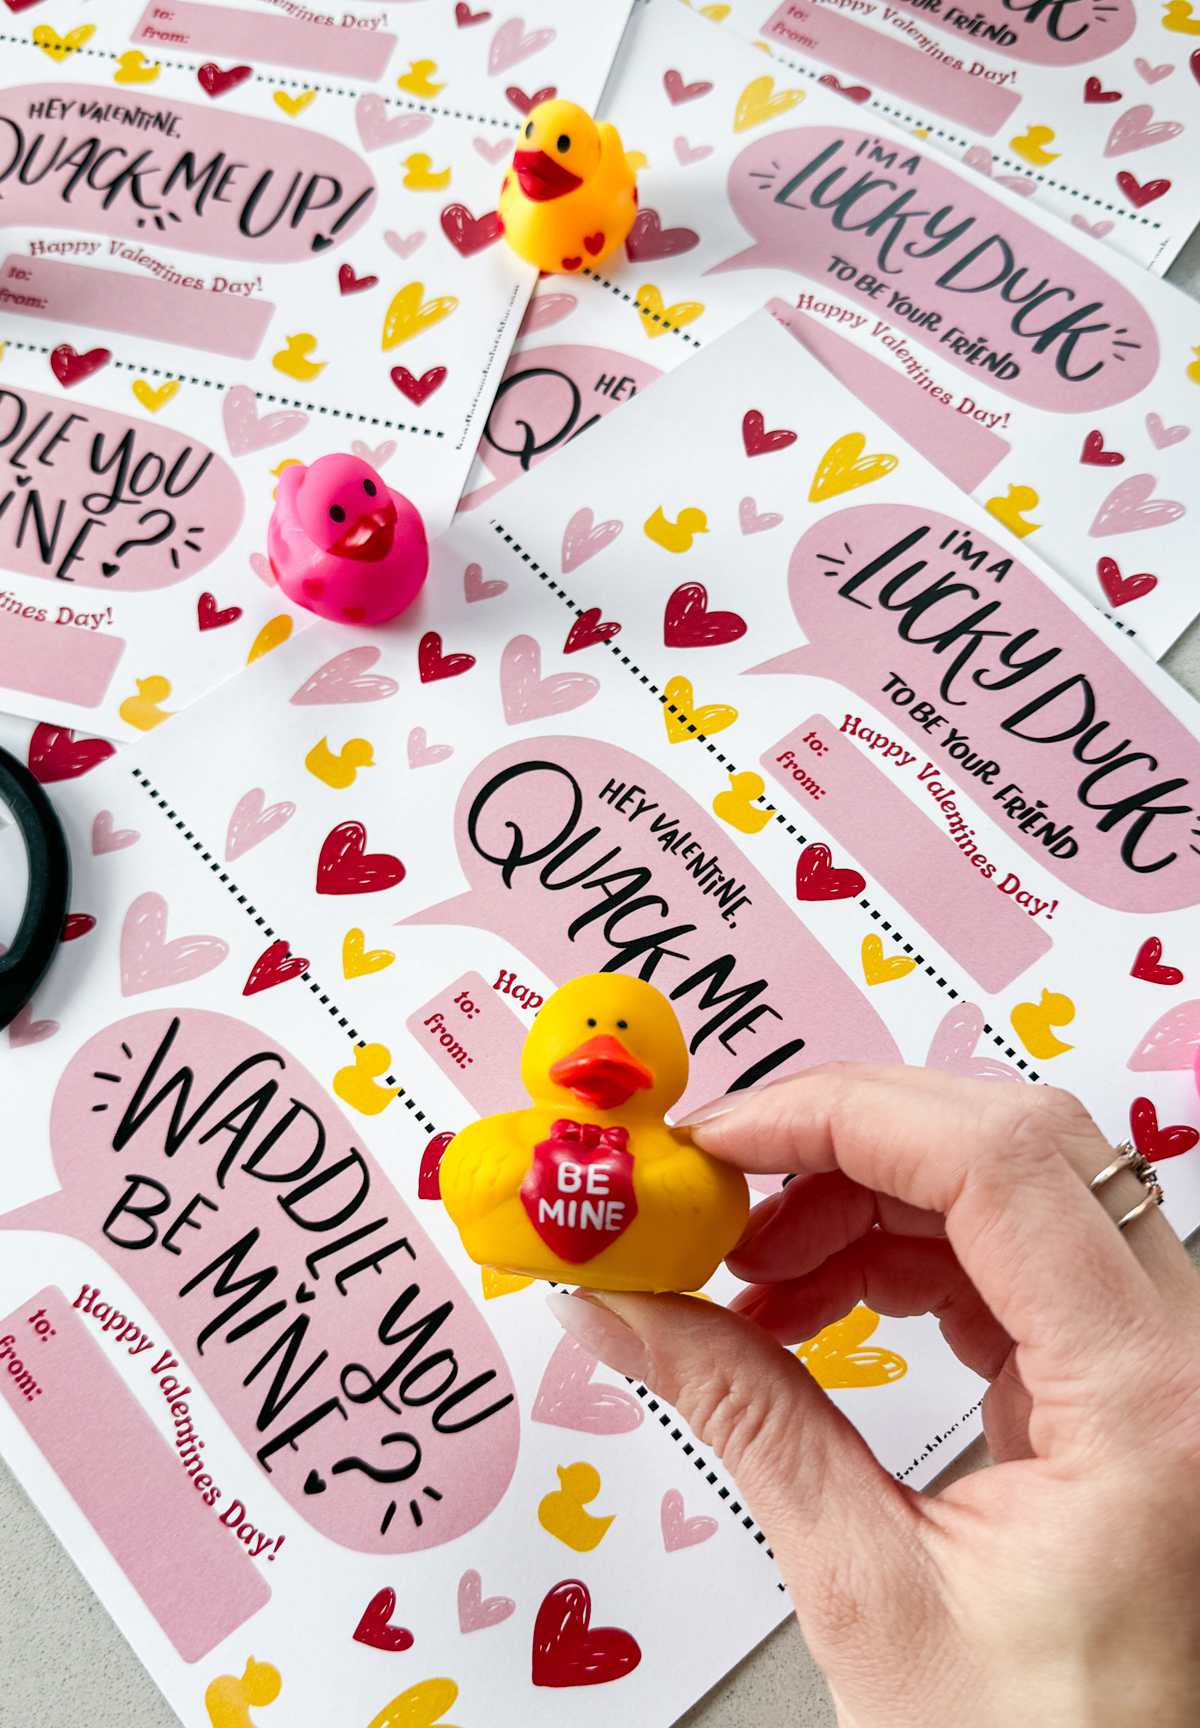 be mine rubber ducky ready to be attached to printable duck themed valentines day cards